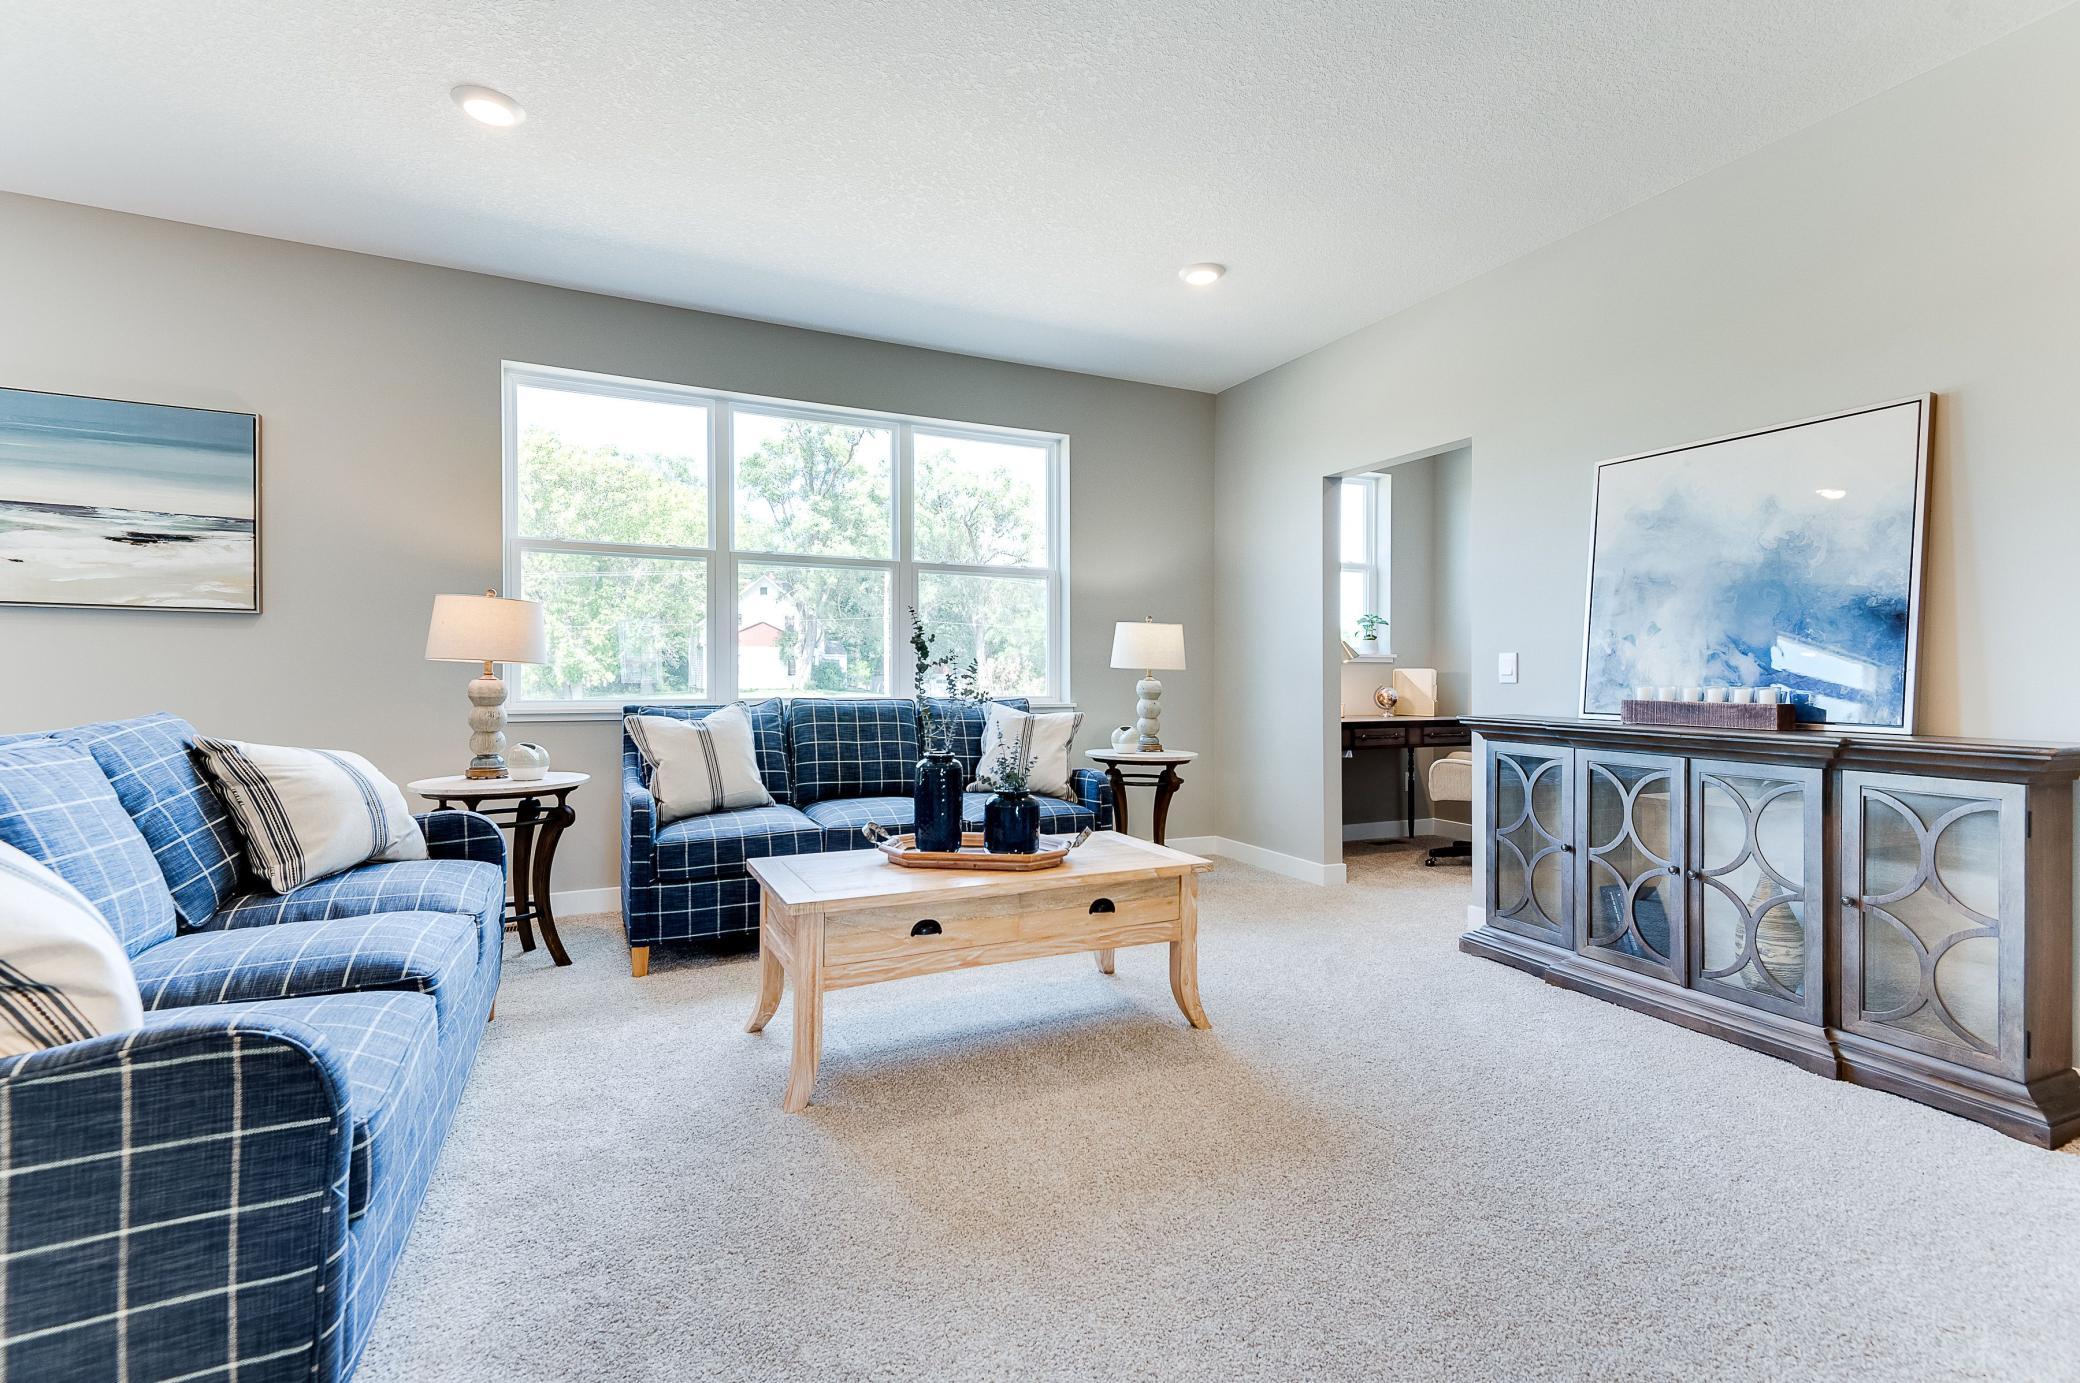 Soaring windows flood your main level family room in natural light - overlooking a sodded generous size backyard & enlightening a space large enough to accommodate just about any furniture combination! Photo of model home, color & options will vary.